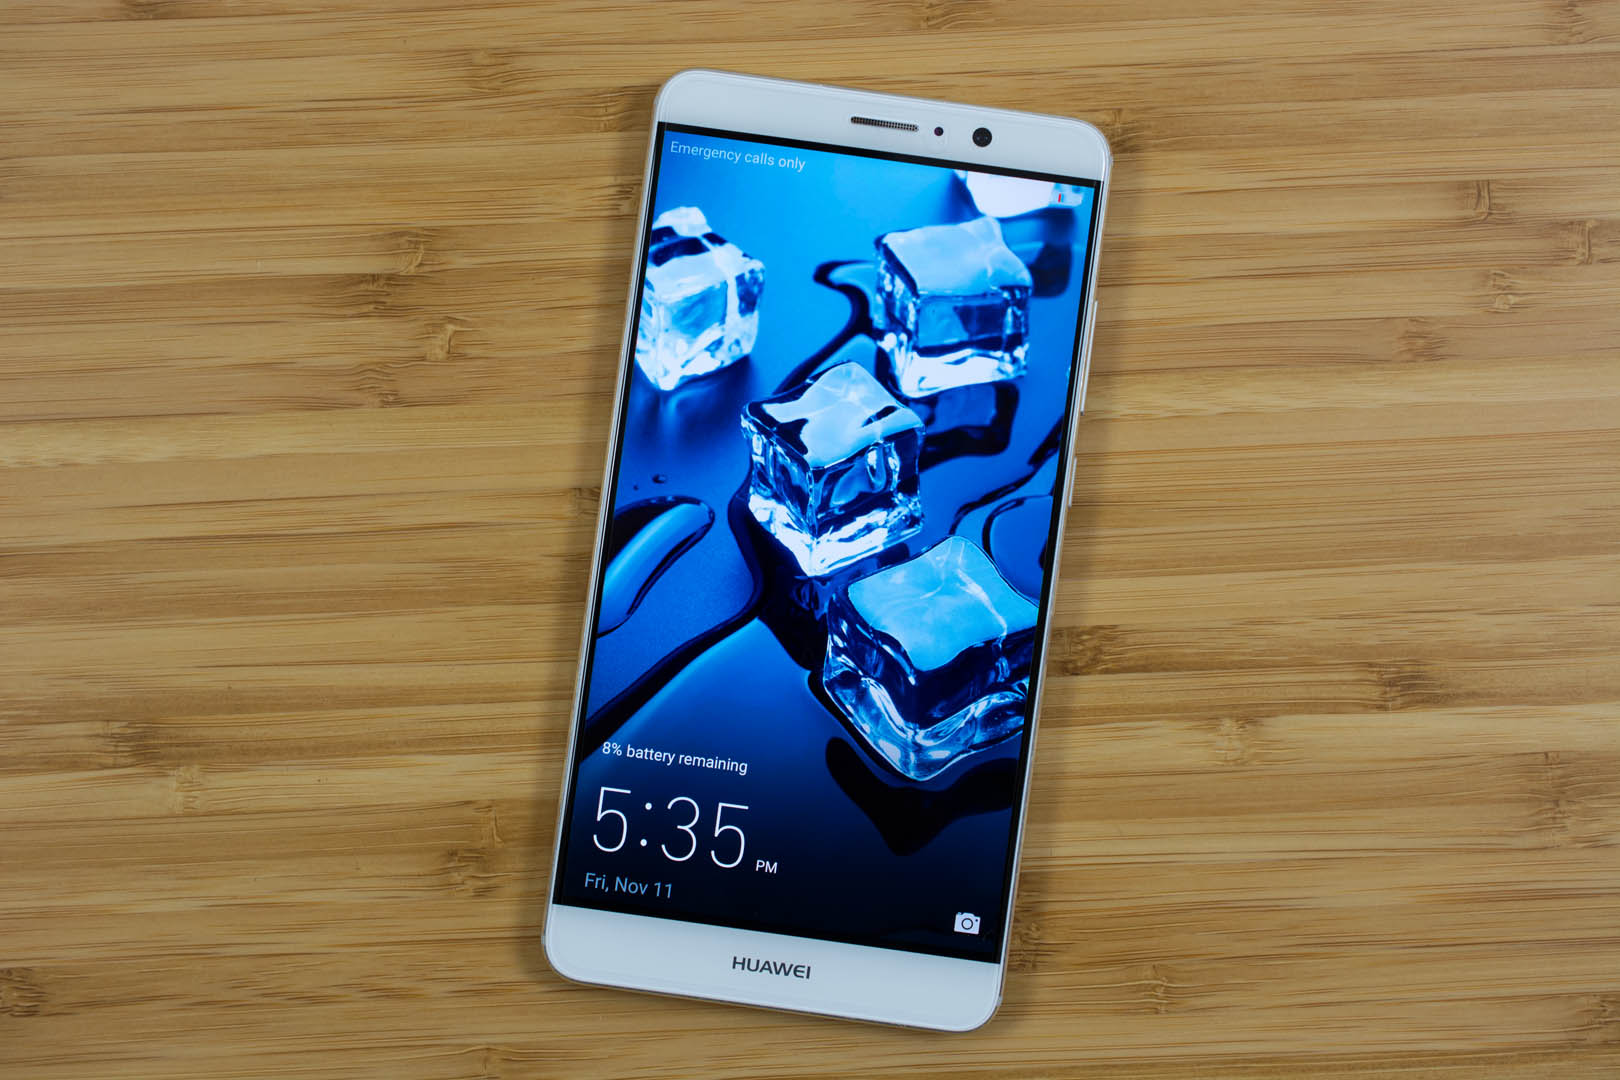 Huawei Mate 9 review: A big phone with enough battery